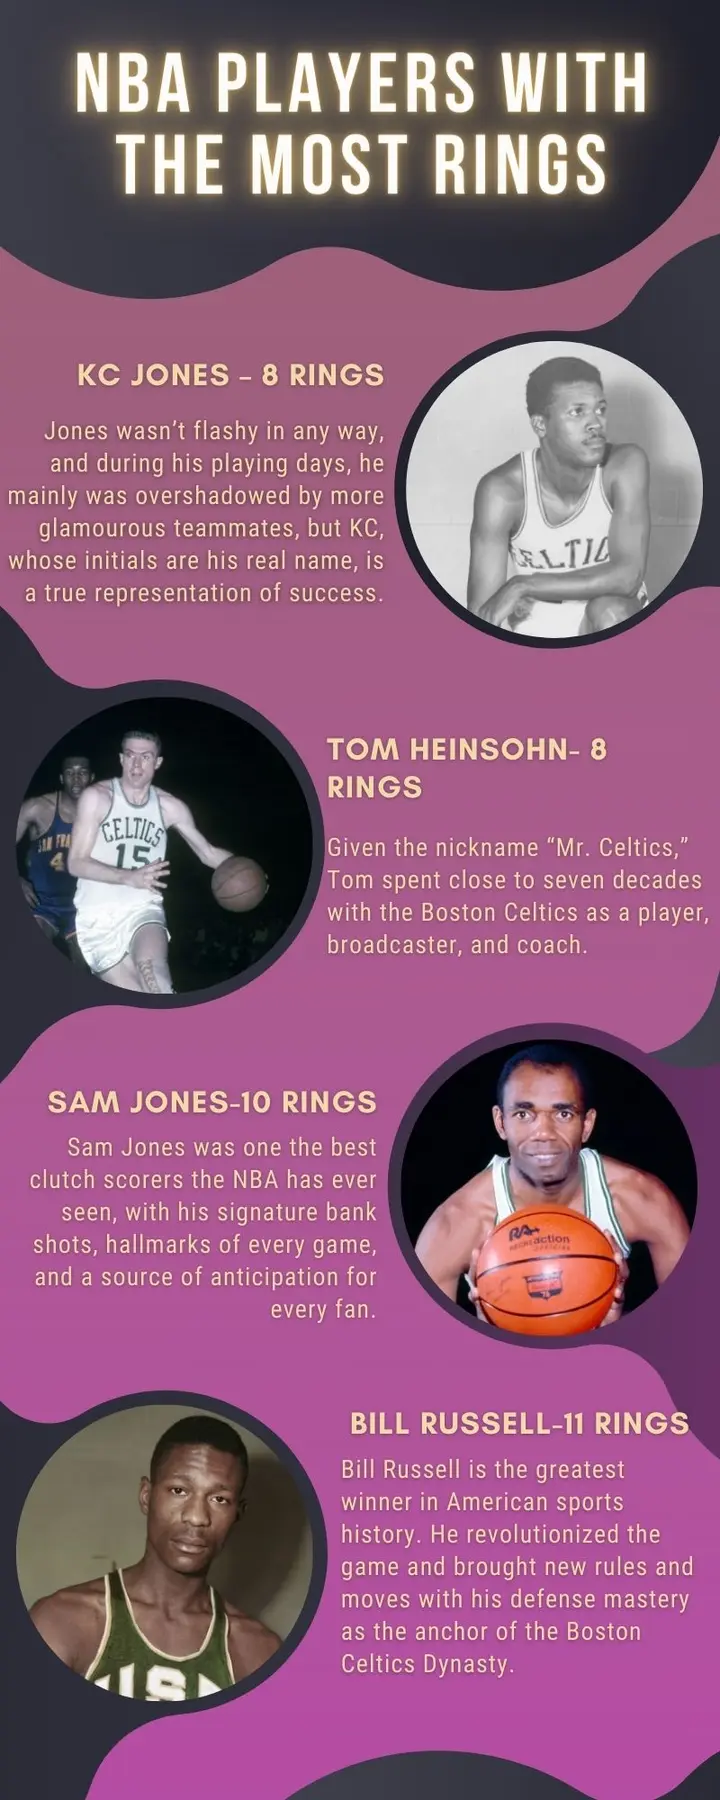 NBA players with the most rings